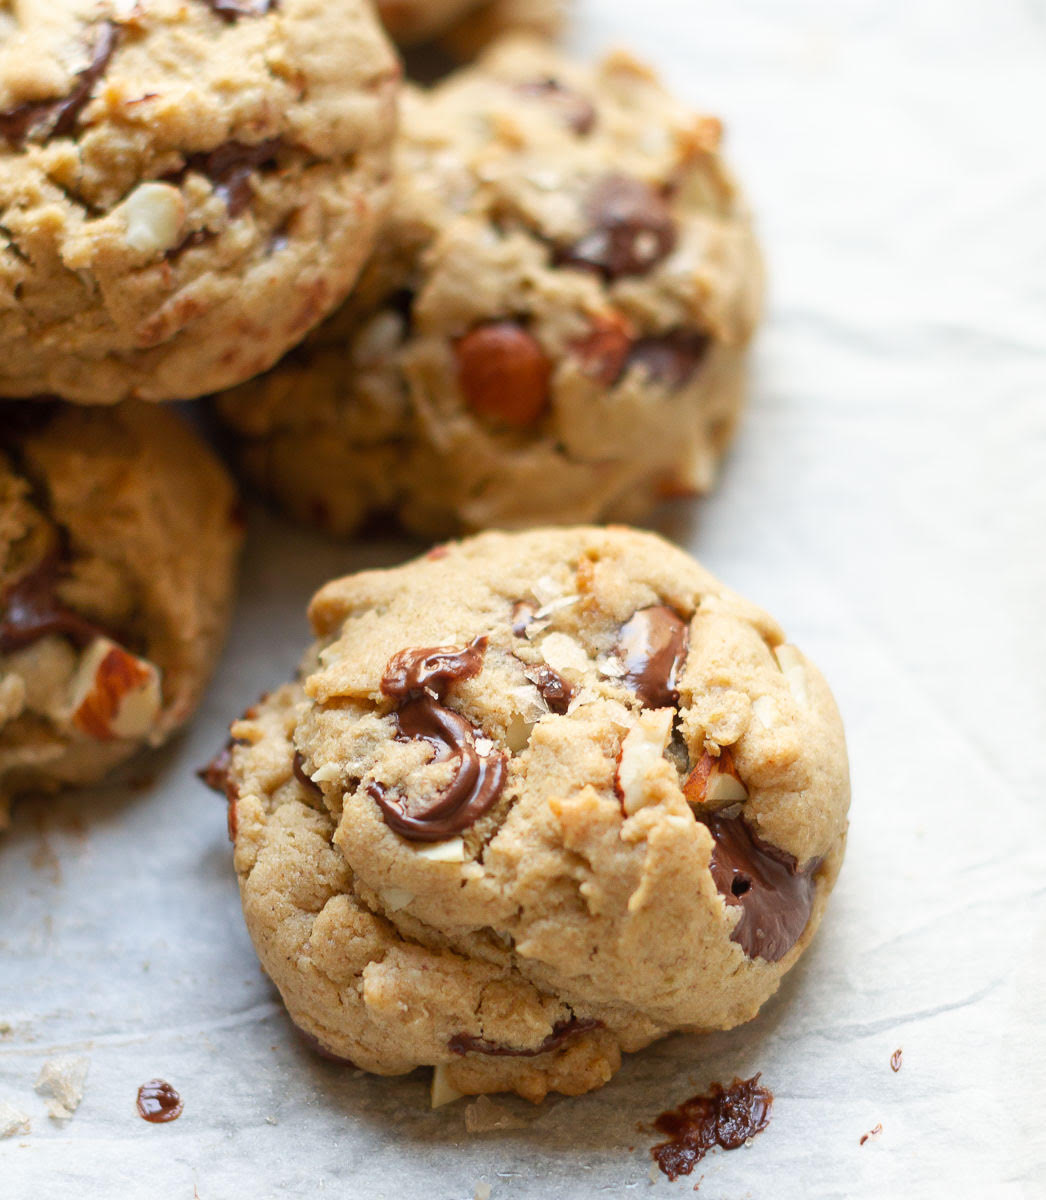 Chewy and Delicious Gluten-Free Chocolate Chip Cookies Recipe
